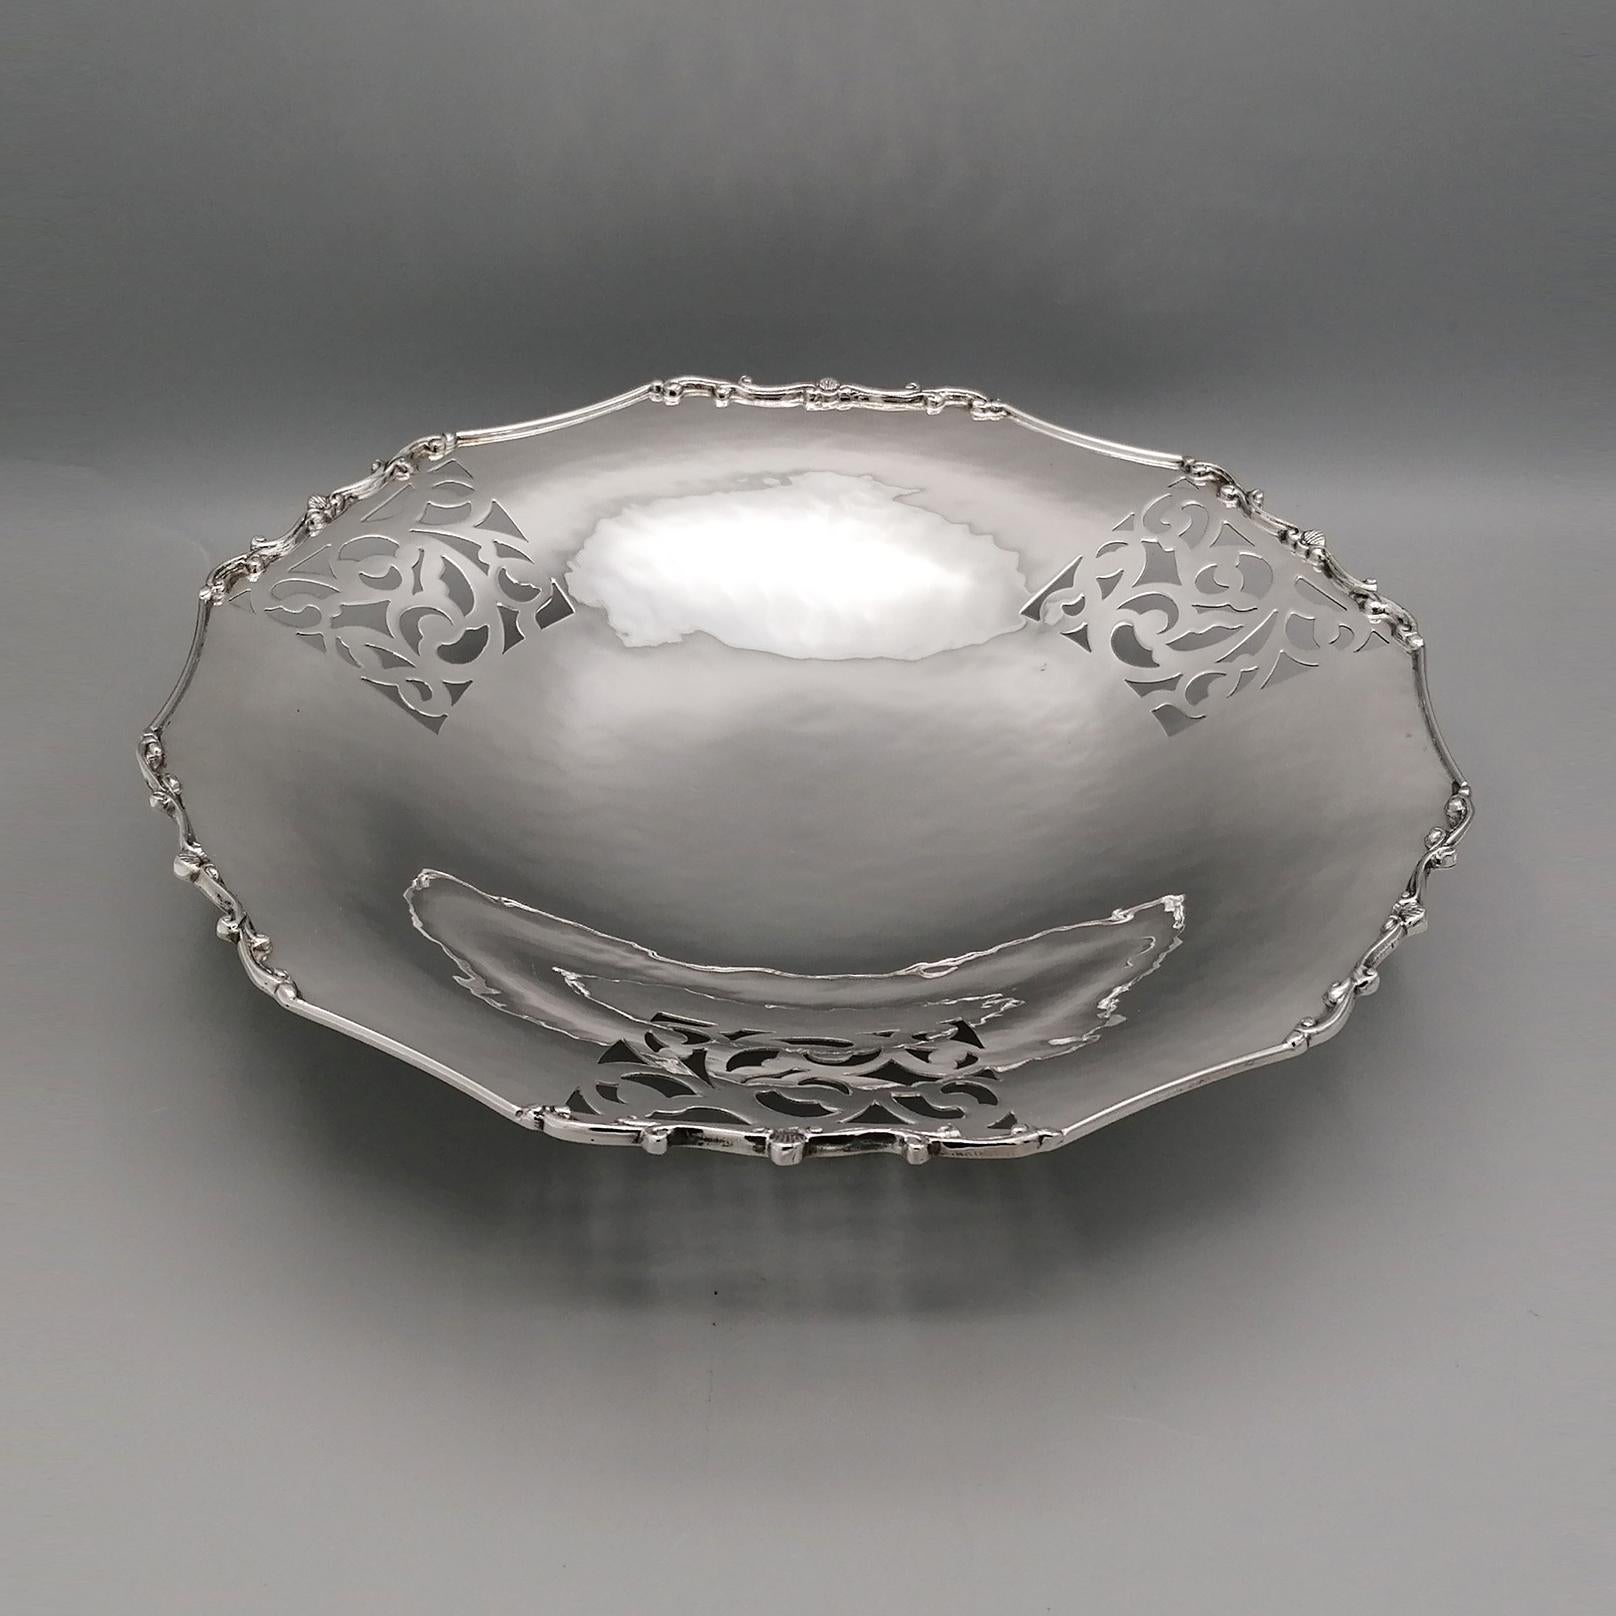 Centerpiece in solid 800 silver in Baroque style.
The dish is shaped on which a border made with the fusion technique with shell motifs and spirals typical of the Baroque style has been welded.
The dish was subsequently hammered and pierced in three